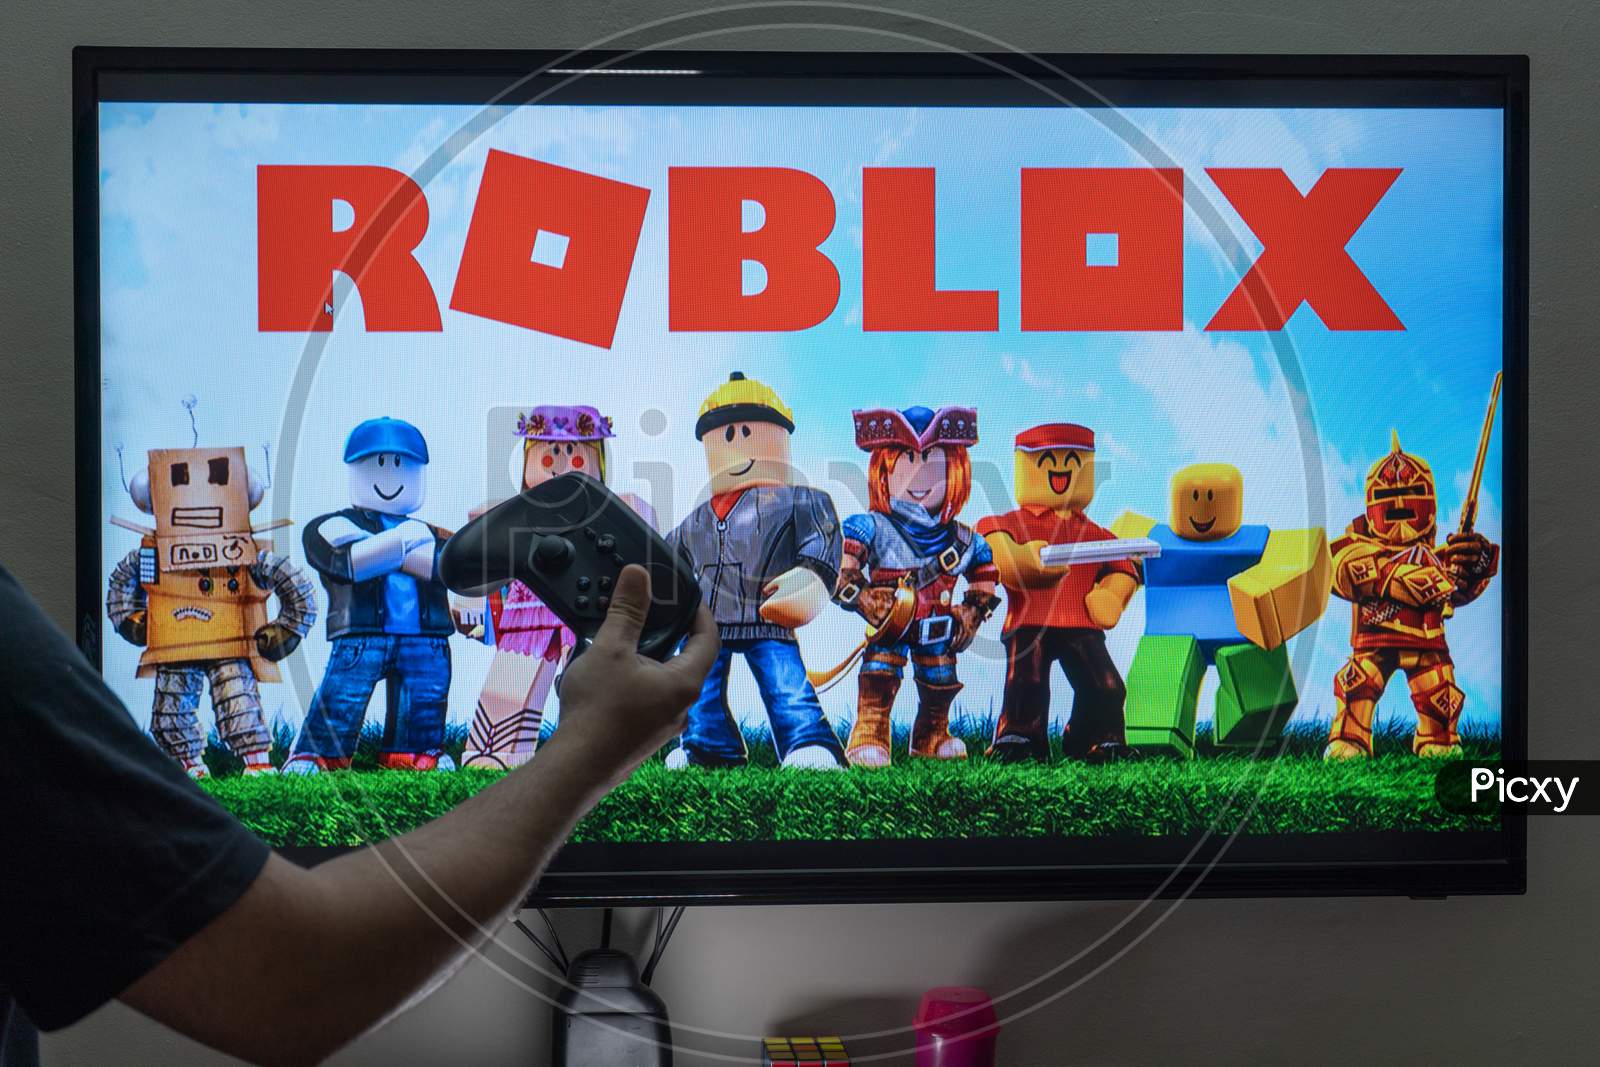 Image Of Man With A Controller Standing In Front Of A Pc Console Tv Screen With A Steam Controller Playing Popular Free To Play Game Roblox Et303787 Picxy - steam controller roblox